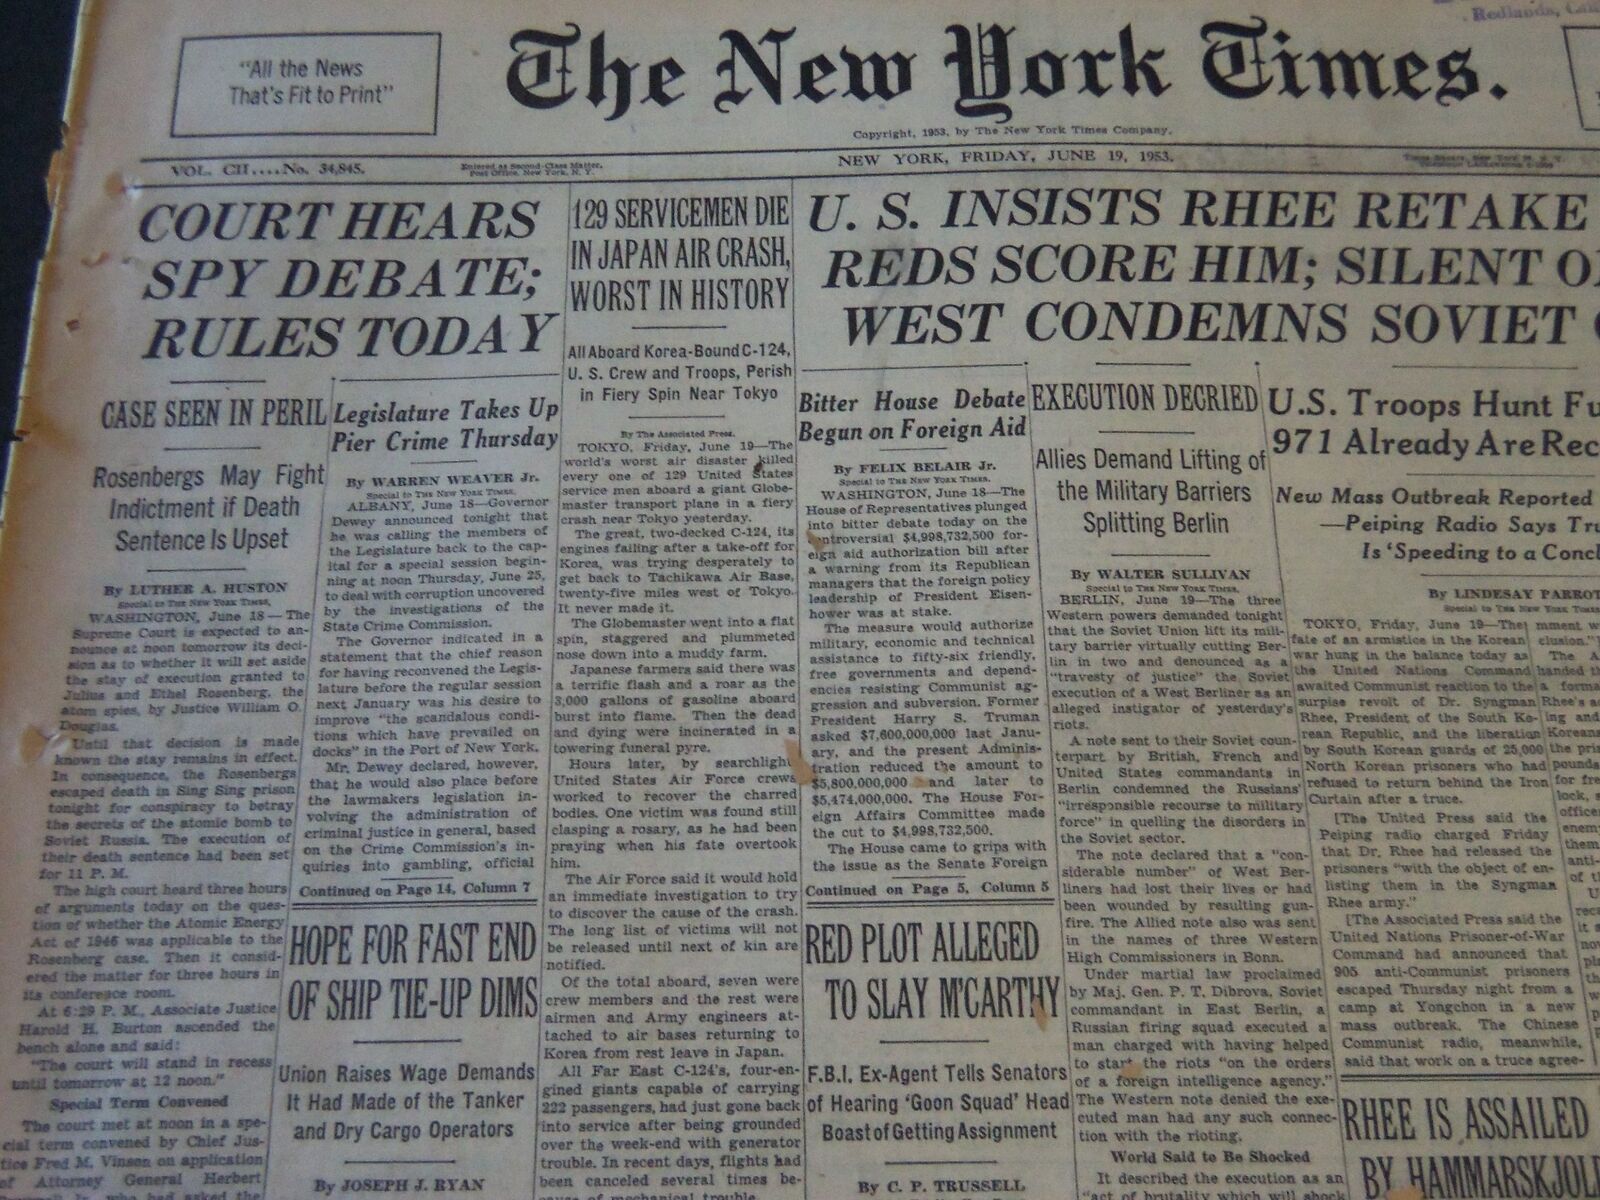 1953 JUNE 19 NEW YORK TIMES - COURT HEARS SPY DEBATE RULES TODAY - NT 6310